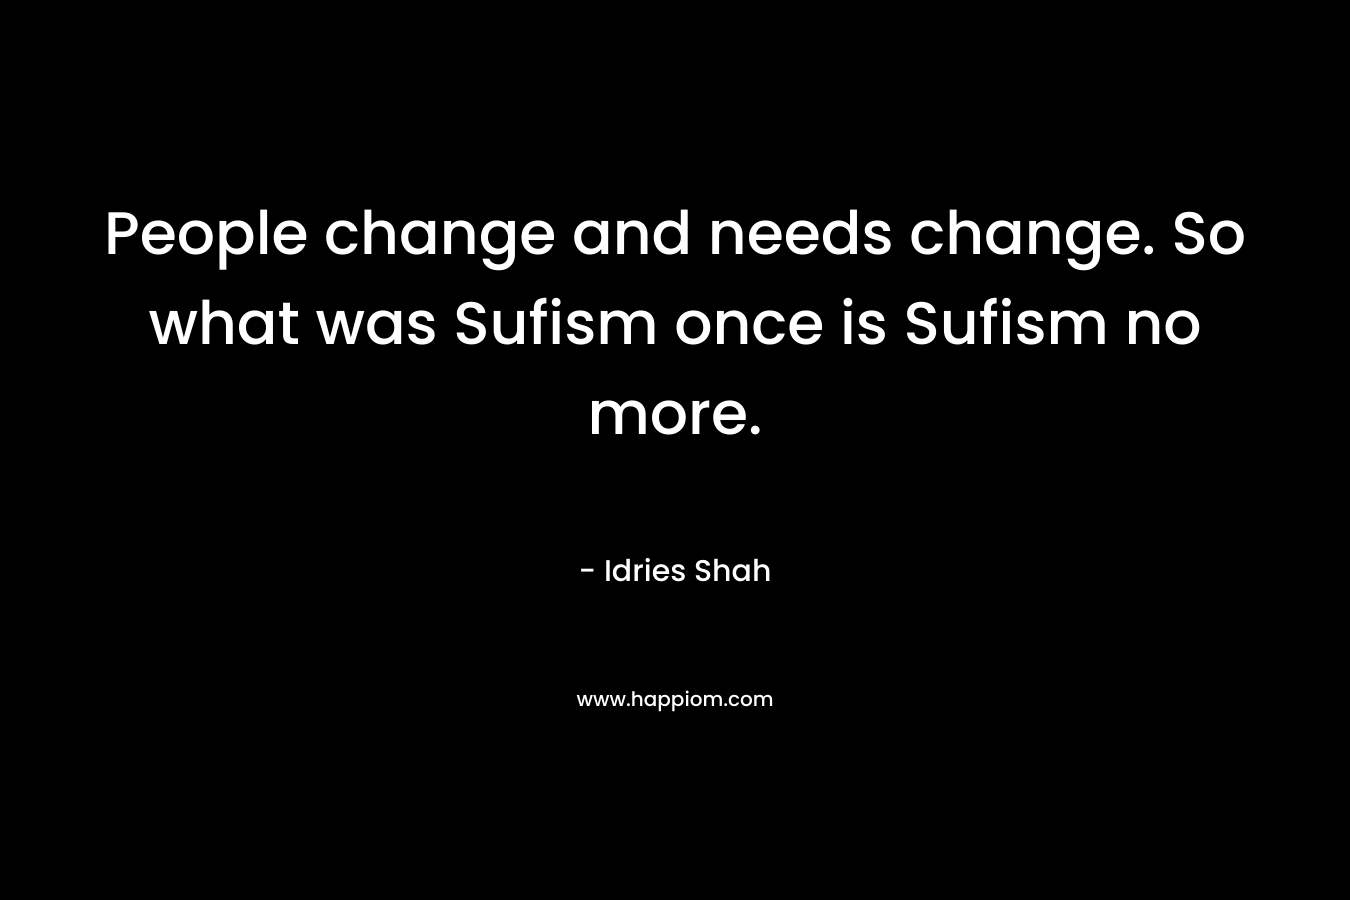 People change and needs change. So what was Sufism once is Sufism no more.